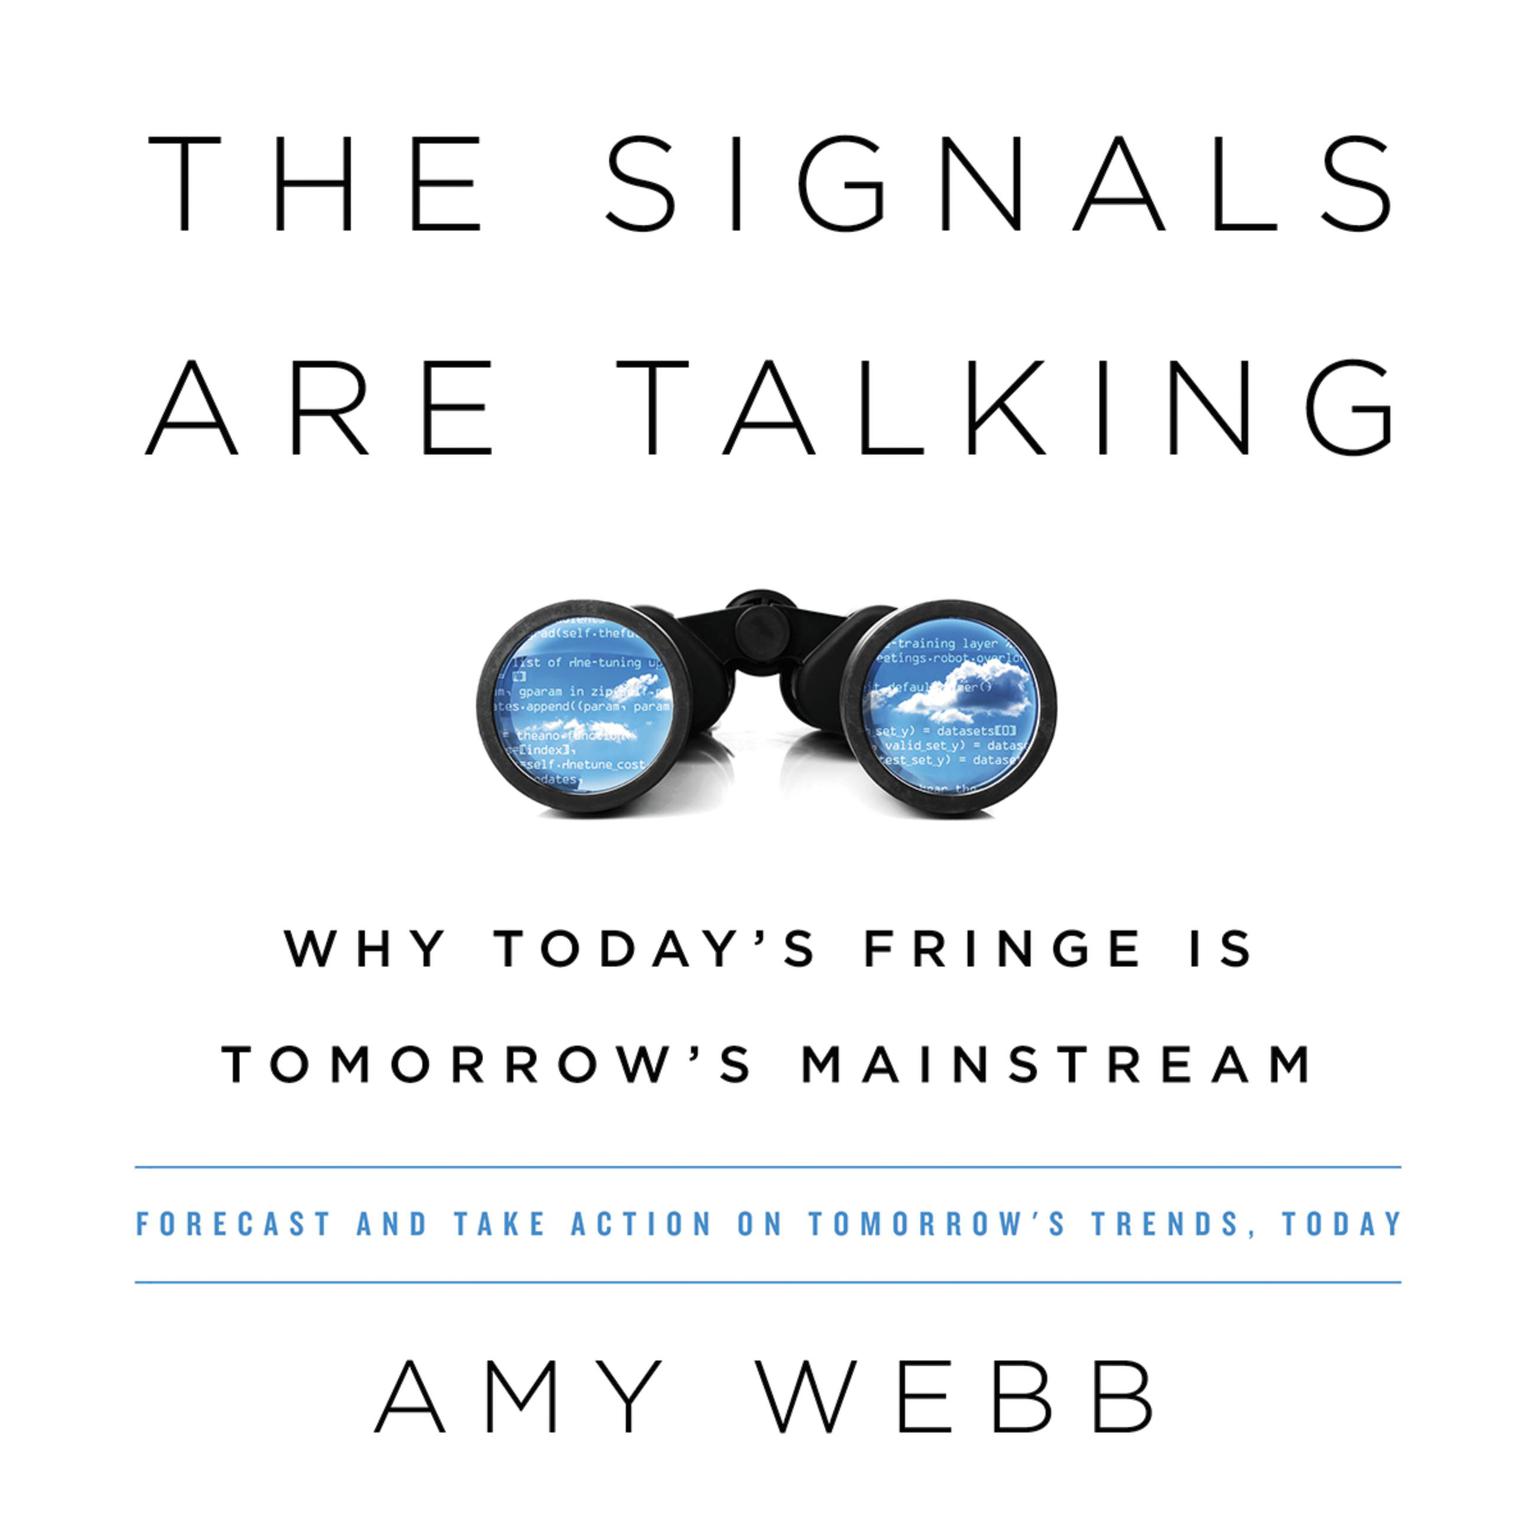 The Signals Are Talking: Why Todays Fringe Is Tomorrows Mainstream Audiobook, by Amy Webb